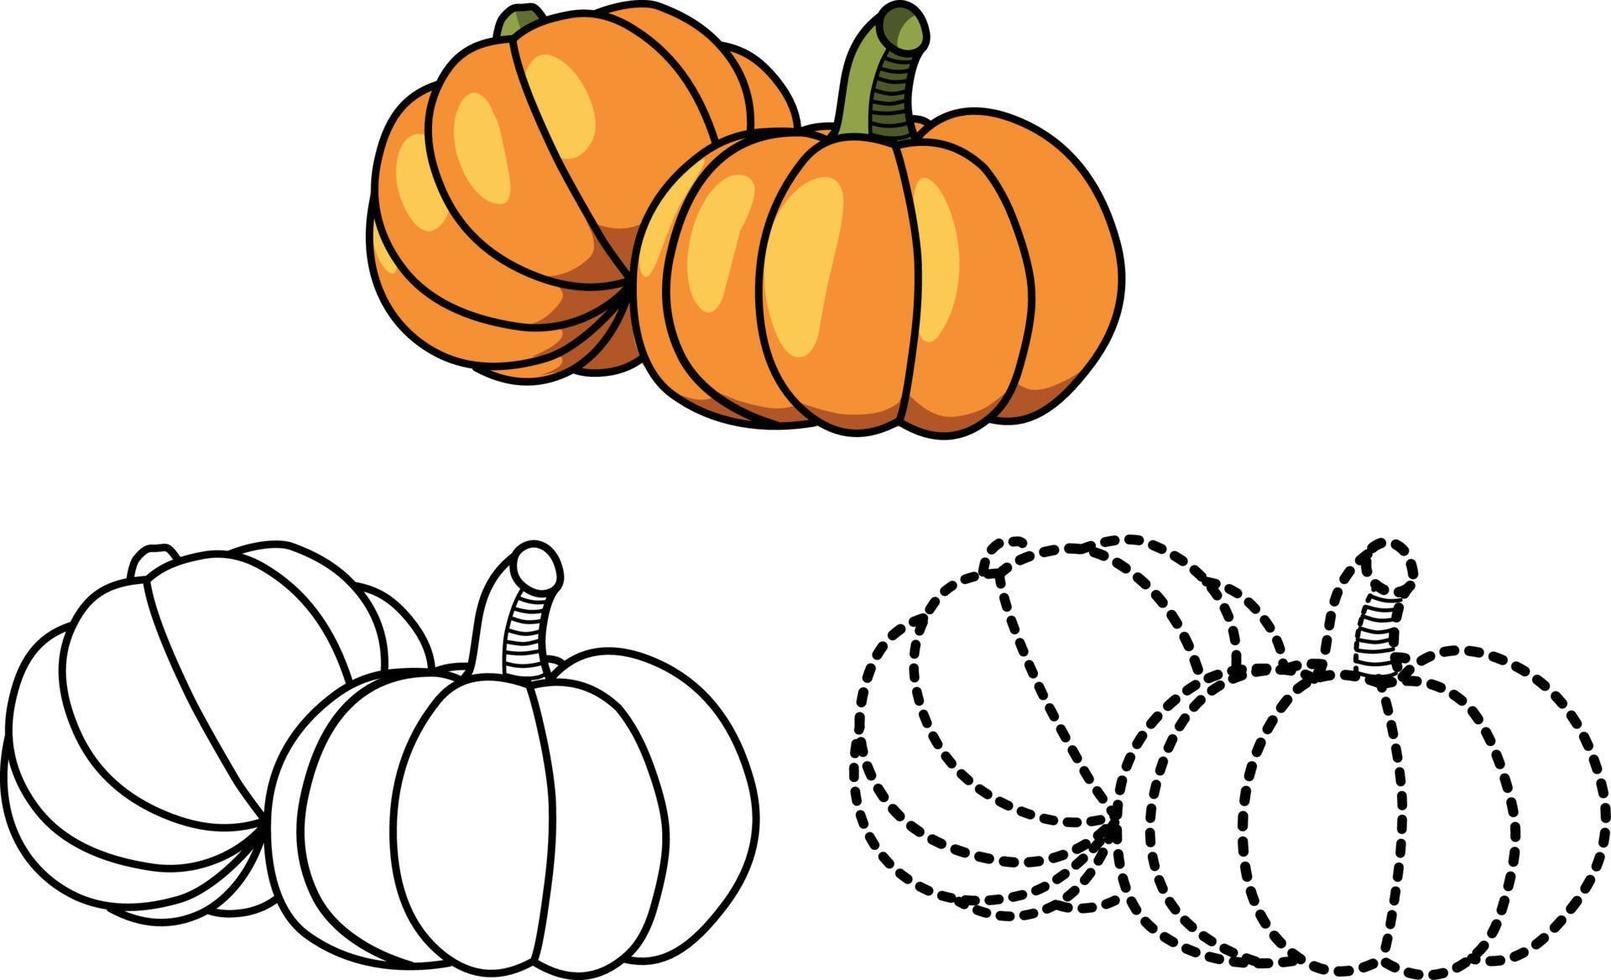 Pages to learn to color pumpkin fruits and vegetables for children vector